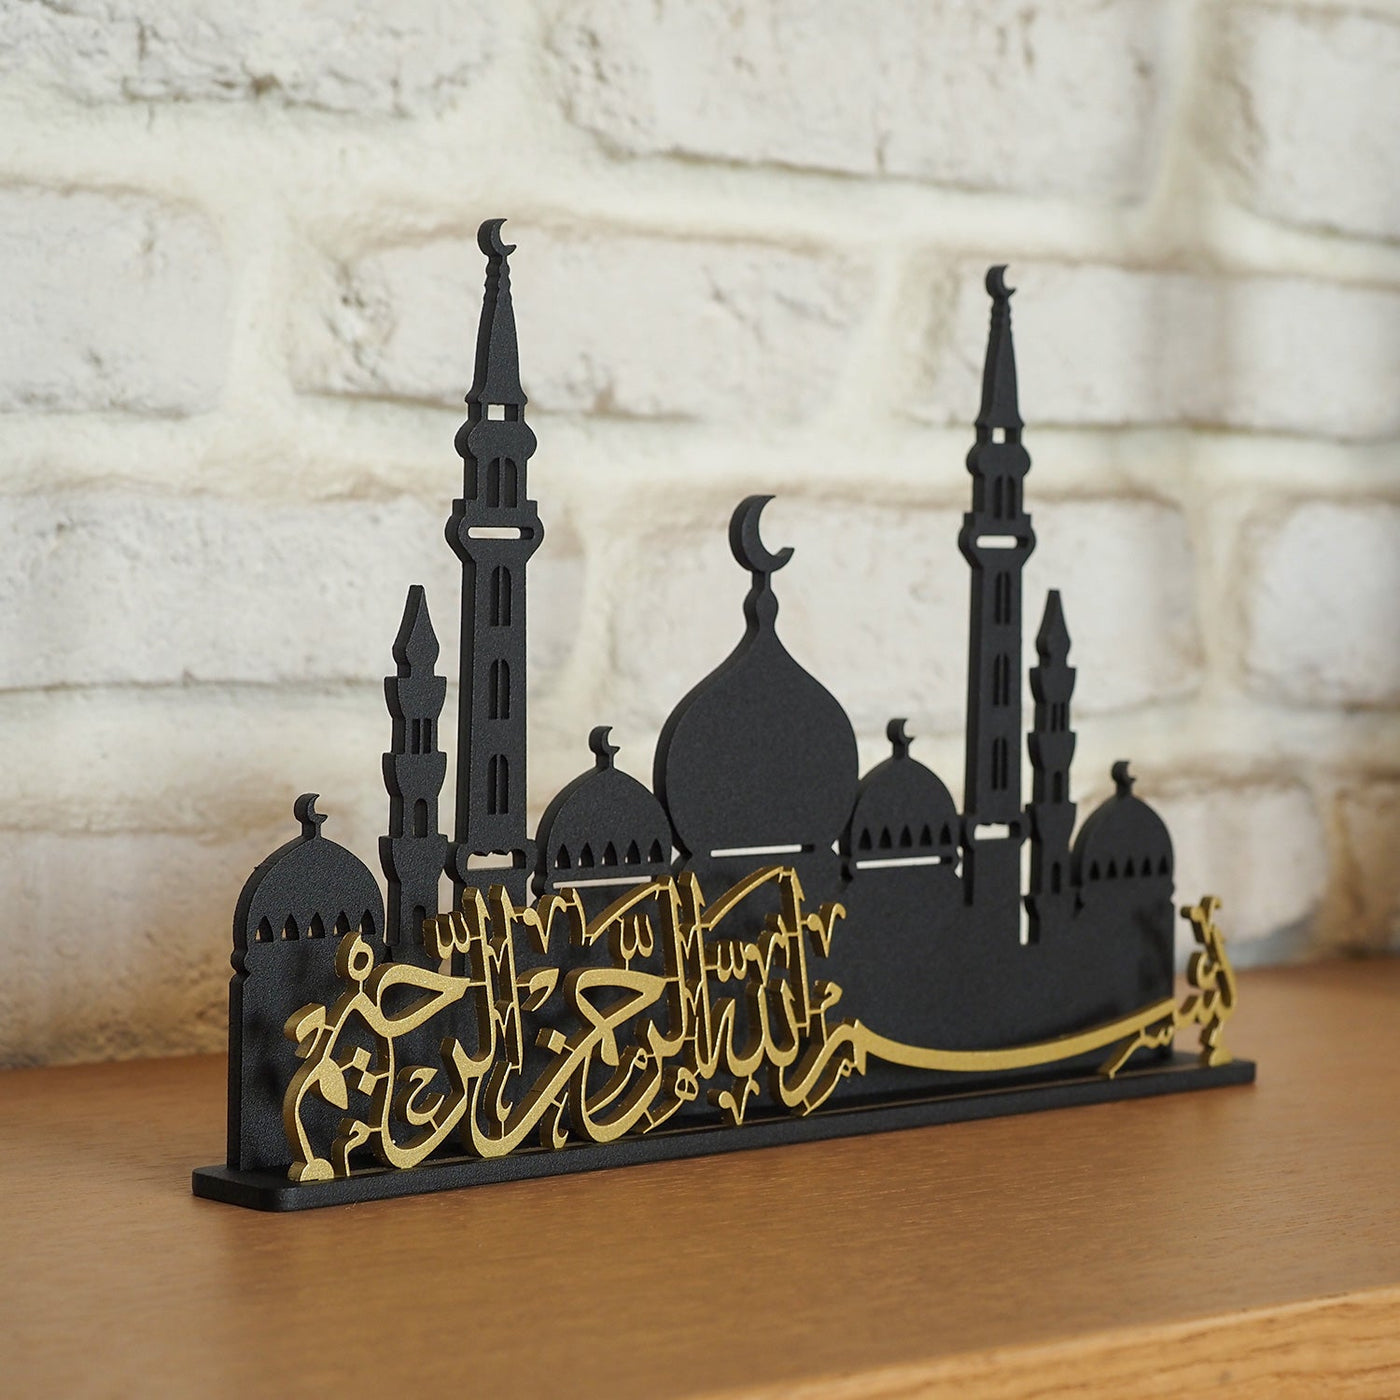 Bismillah Written Metal Islamic Tabletop Decor with Mosque Silhouette - WAMH139